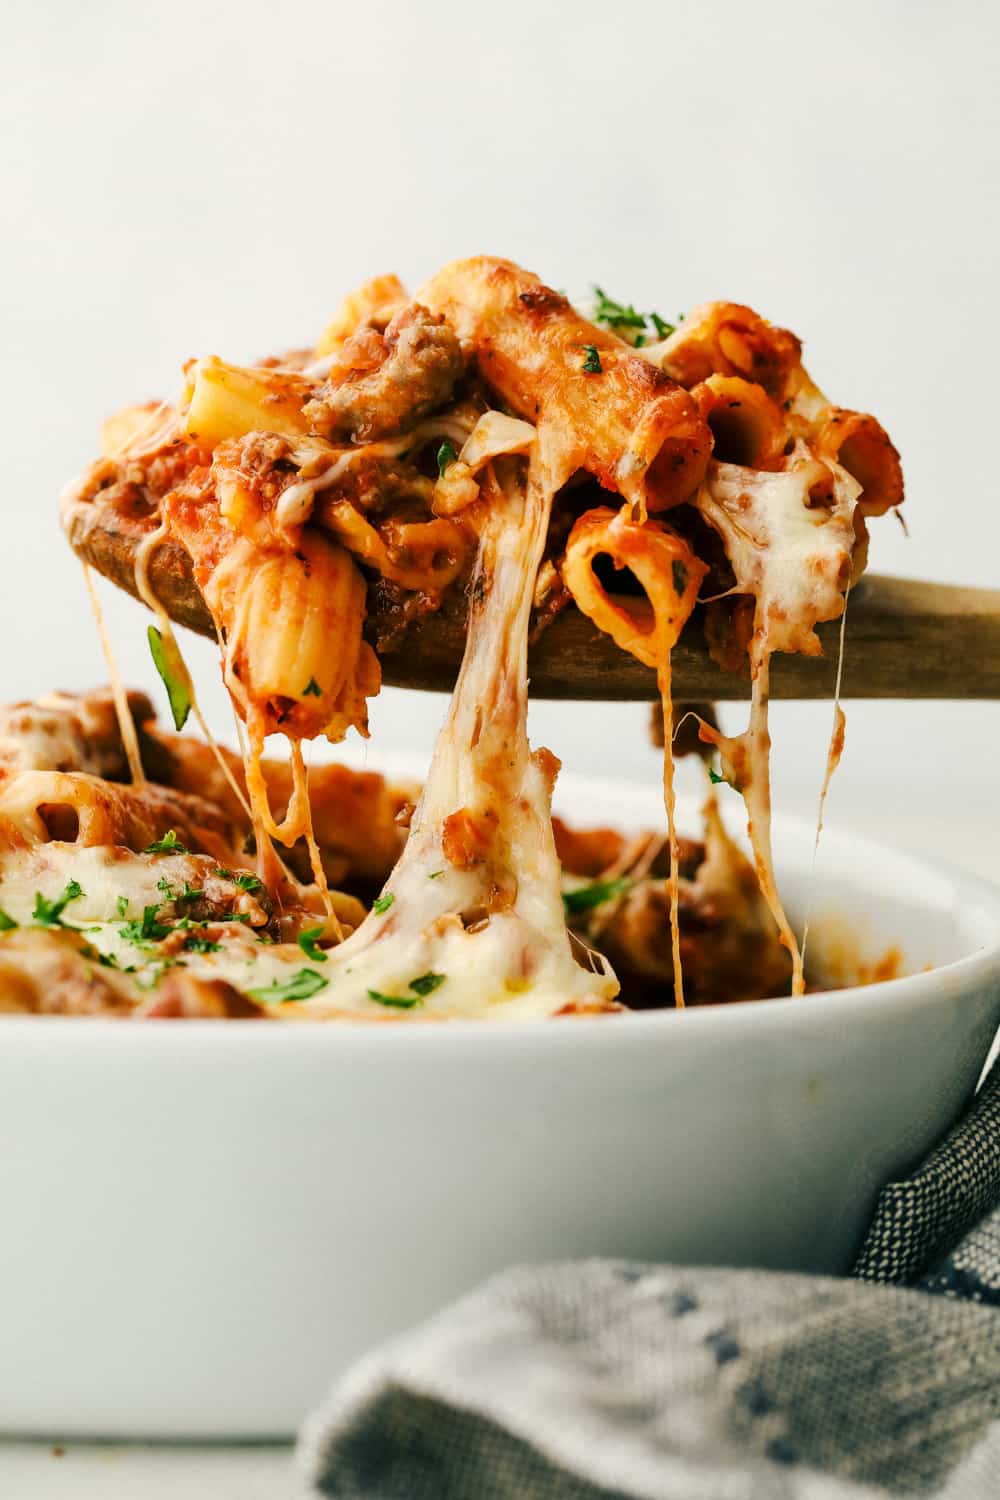 Baked rigatoni being spooned out of a bowl.